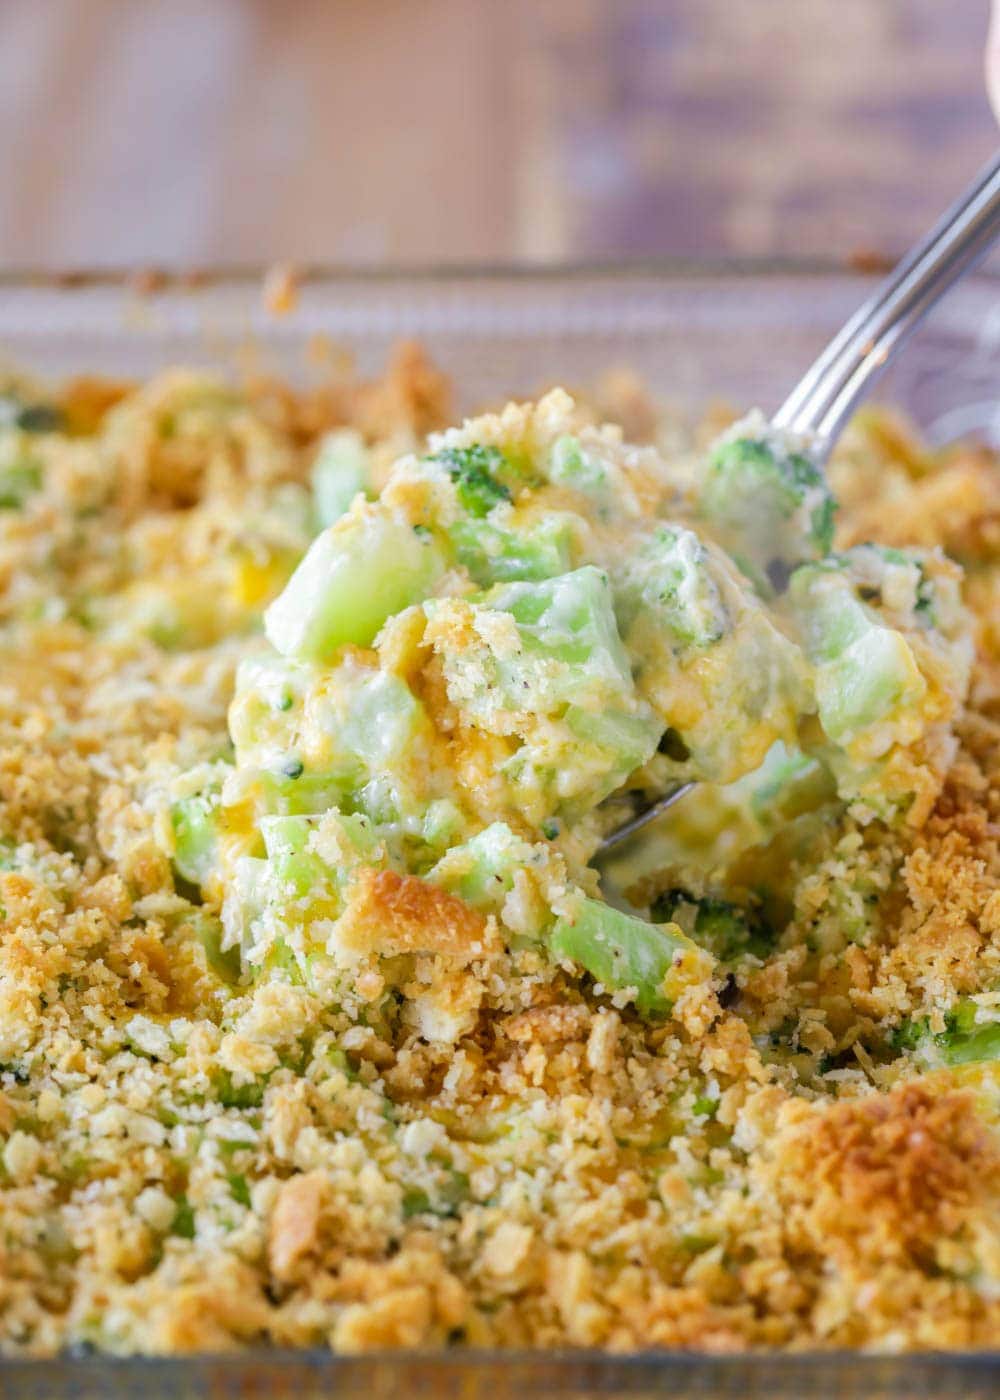 Close up of spoon scooping broccoli and cheese casserole